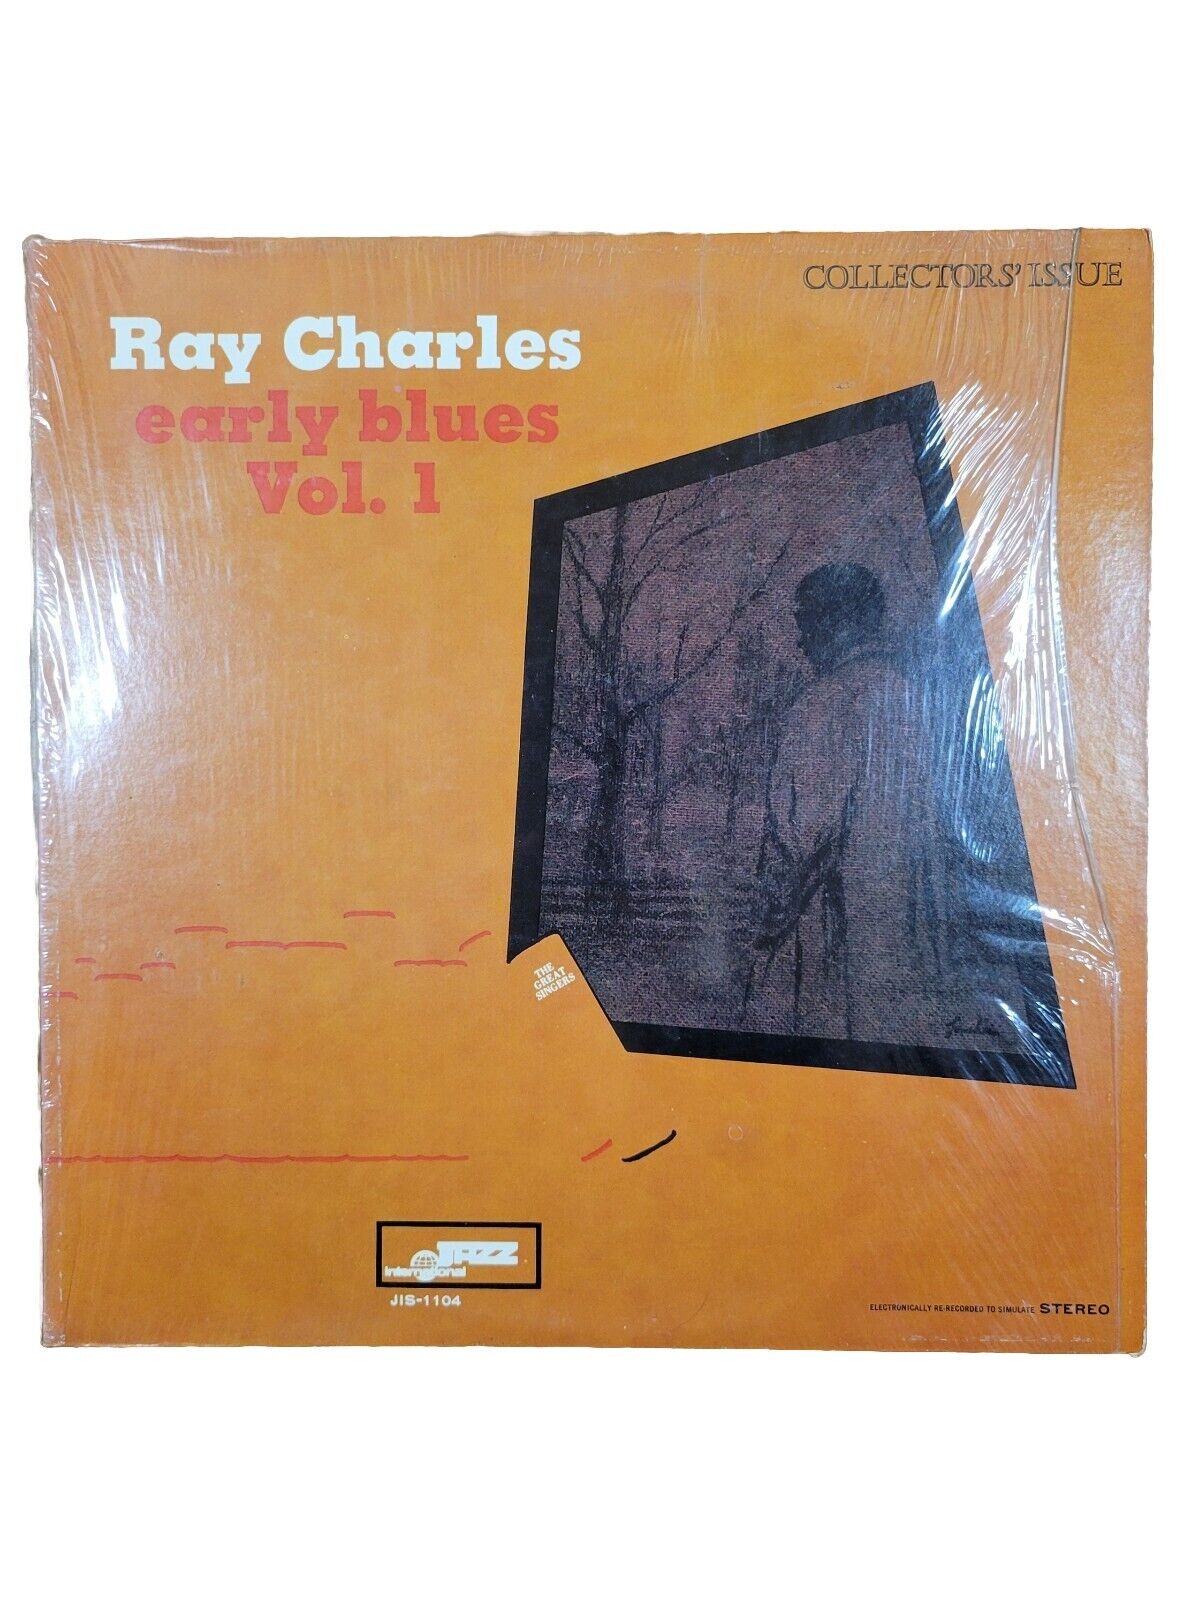 VTG. 1962 RAY CHARLES Early Blues Vol 1 Collectors\' Issue, Preowned